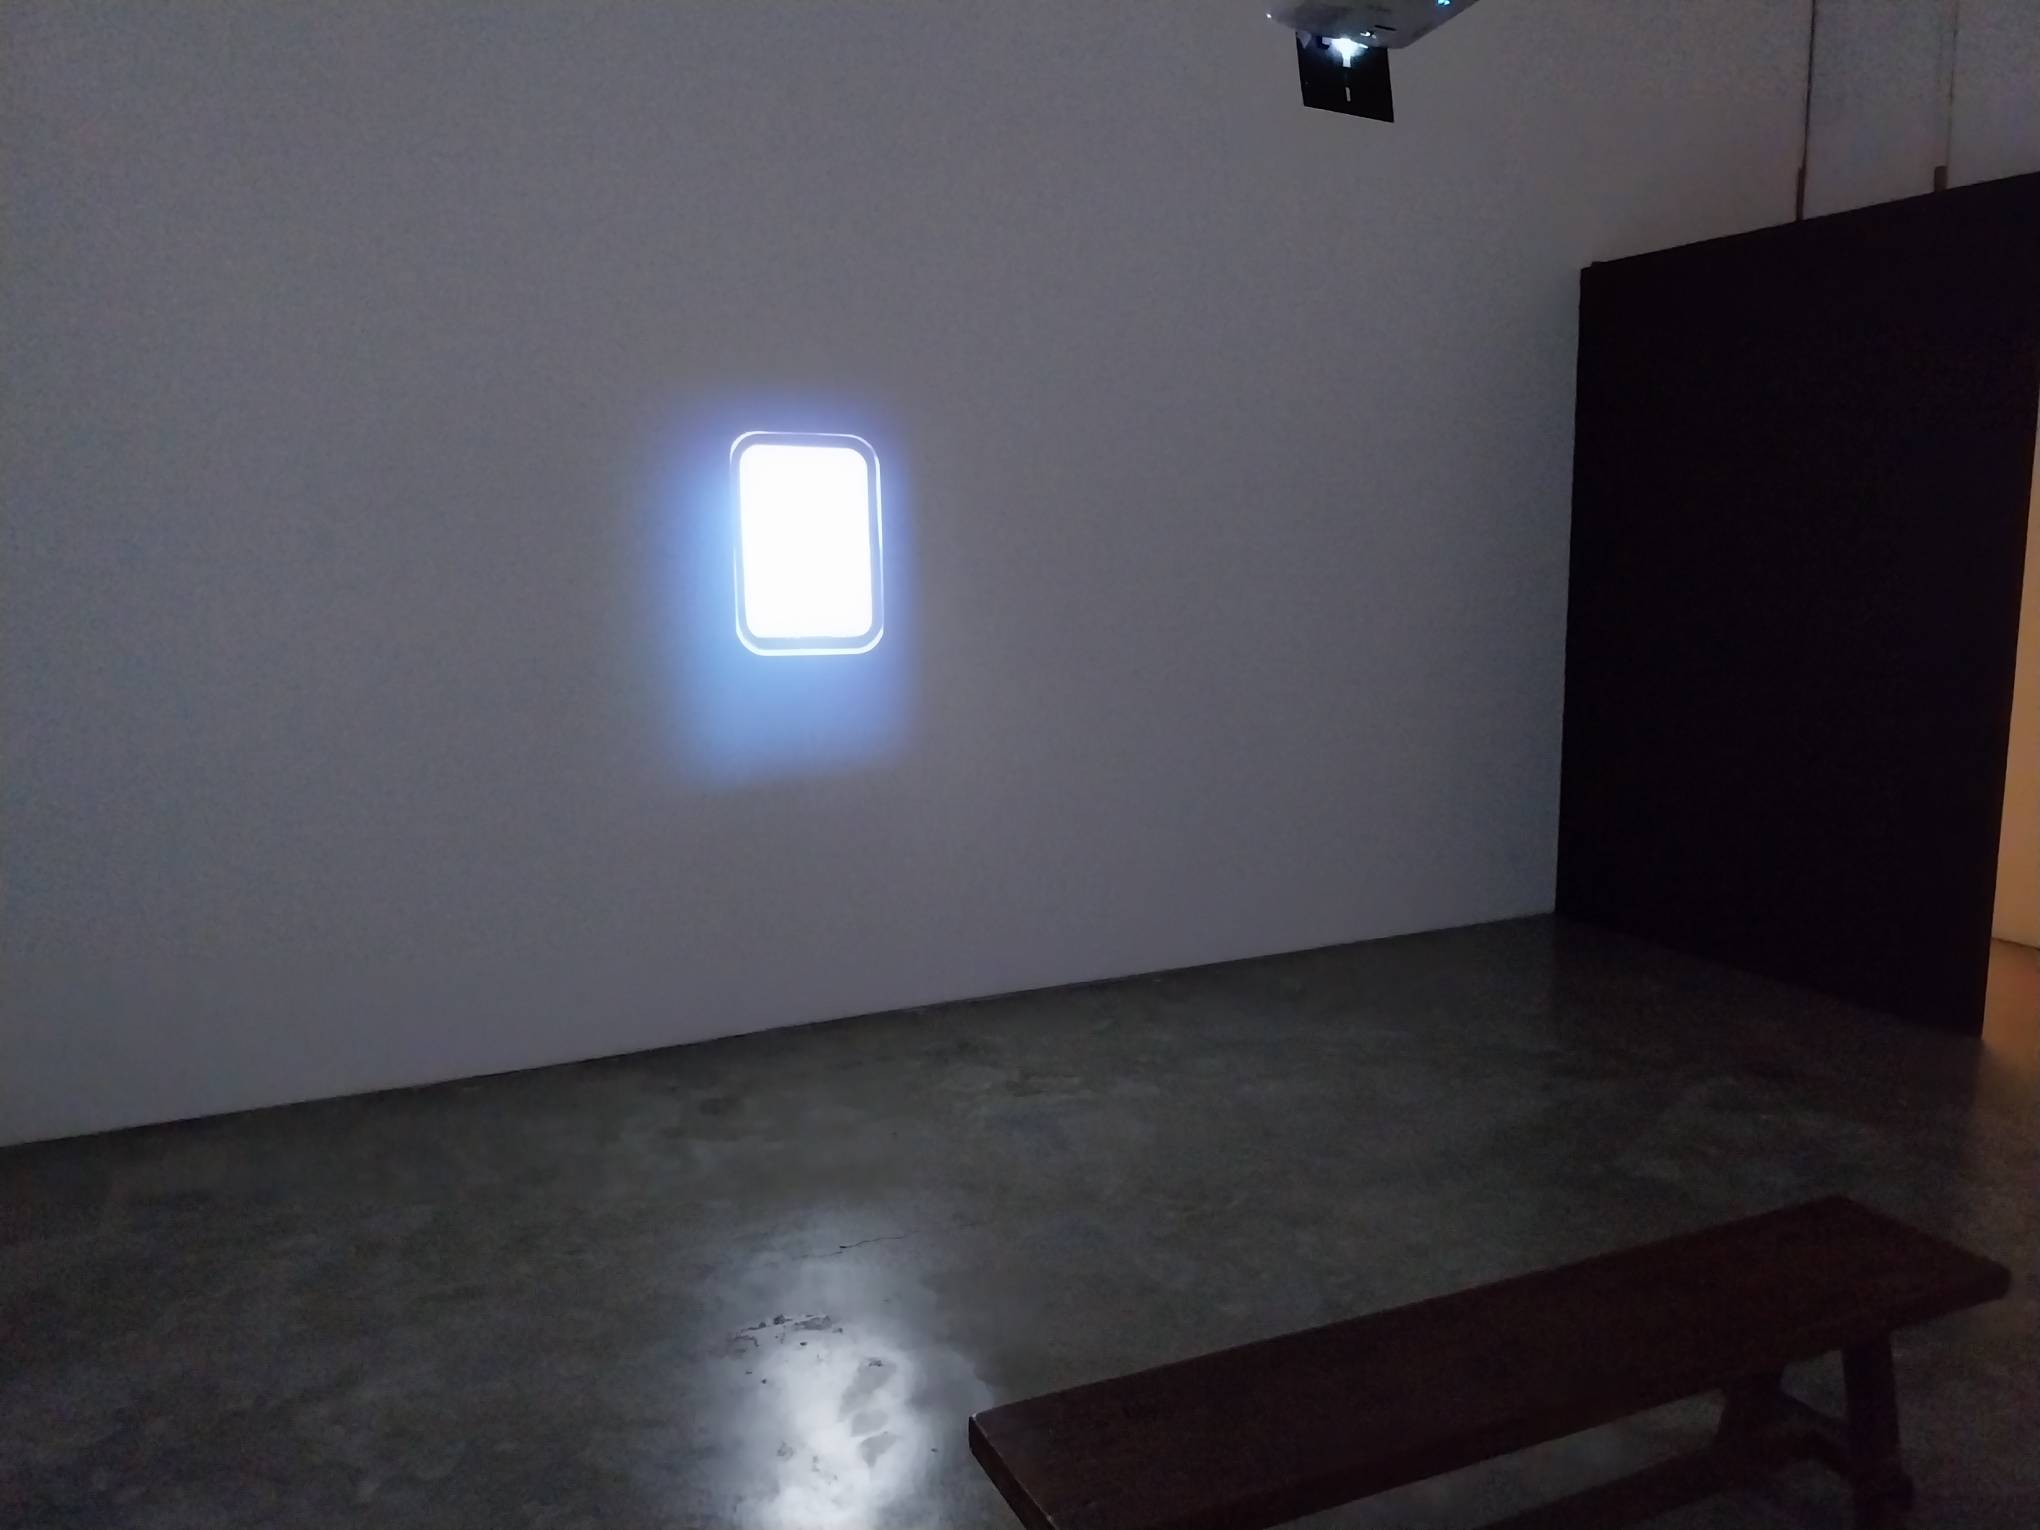 The bench where you can sit and look at a simulation of a window. Photo by Elle Yap.